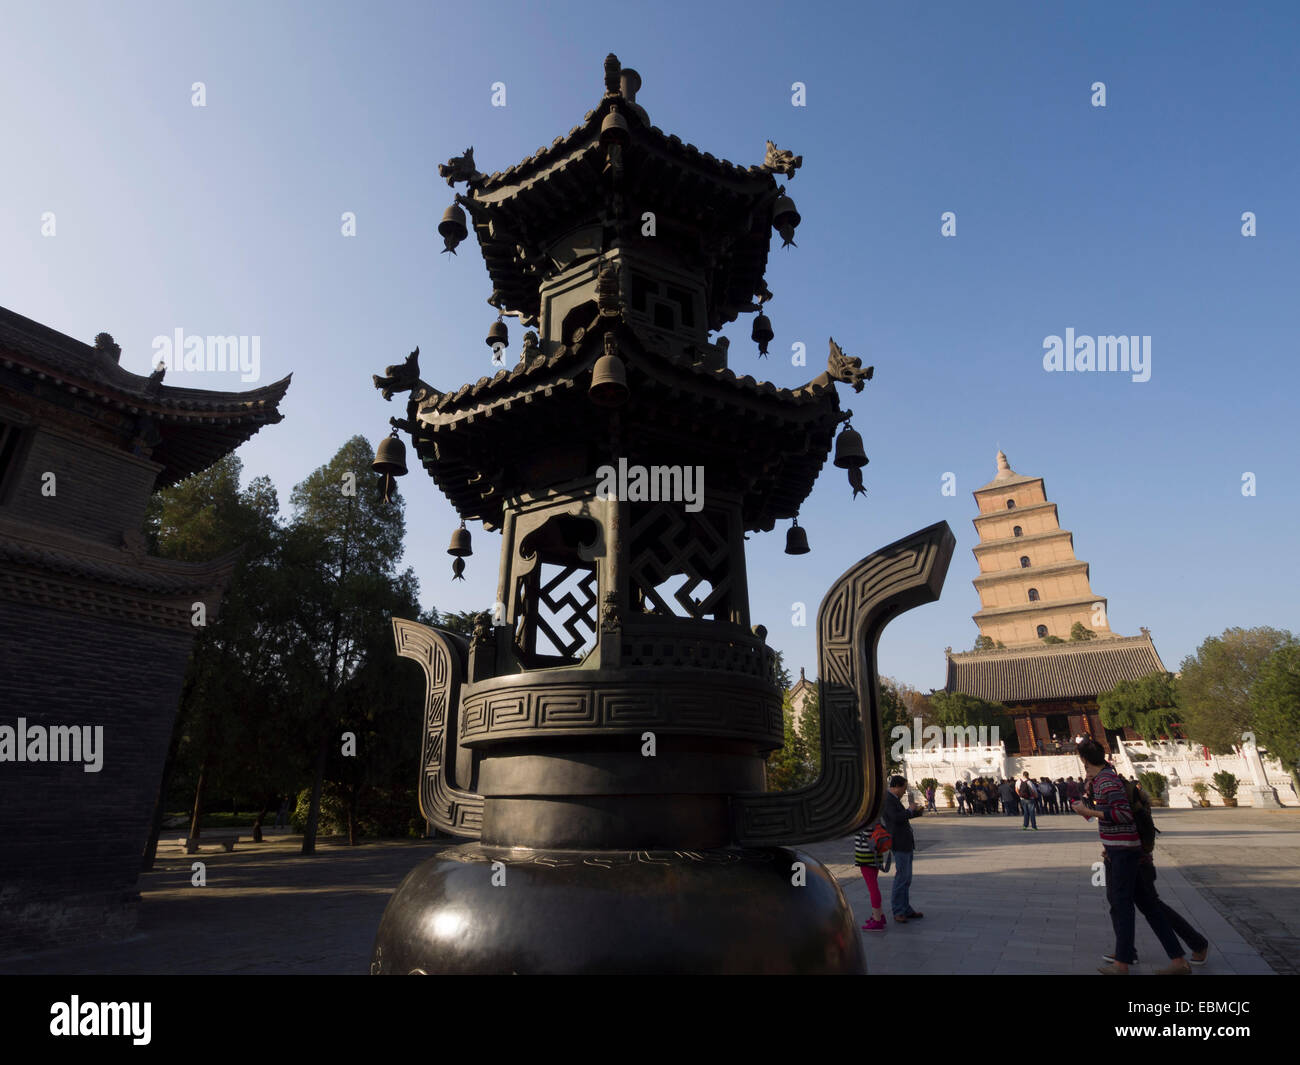 Incense burner in front of the Big Wild Goose Pagoda at the Da Ci'en Buddhist temple in Xian, China Stock Photo